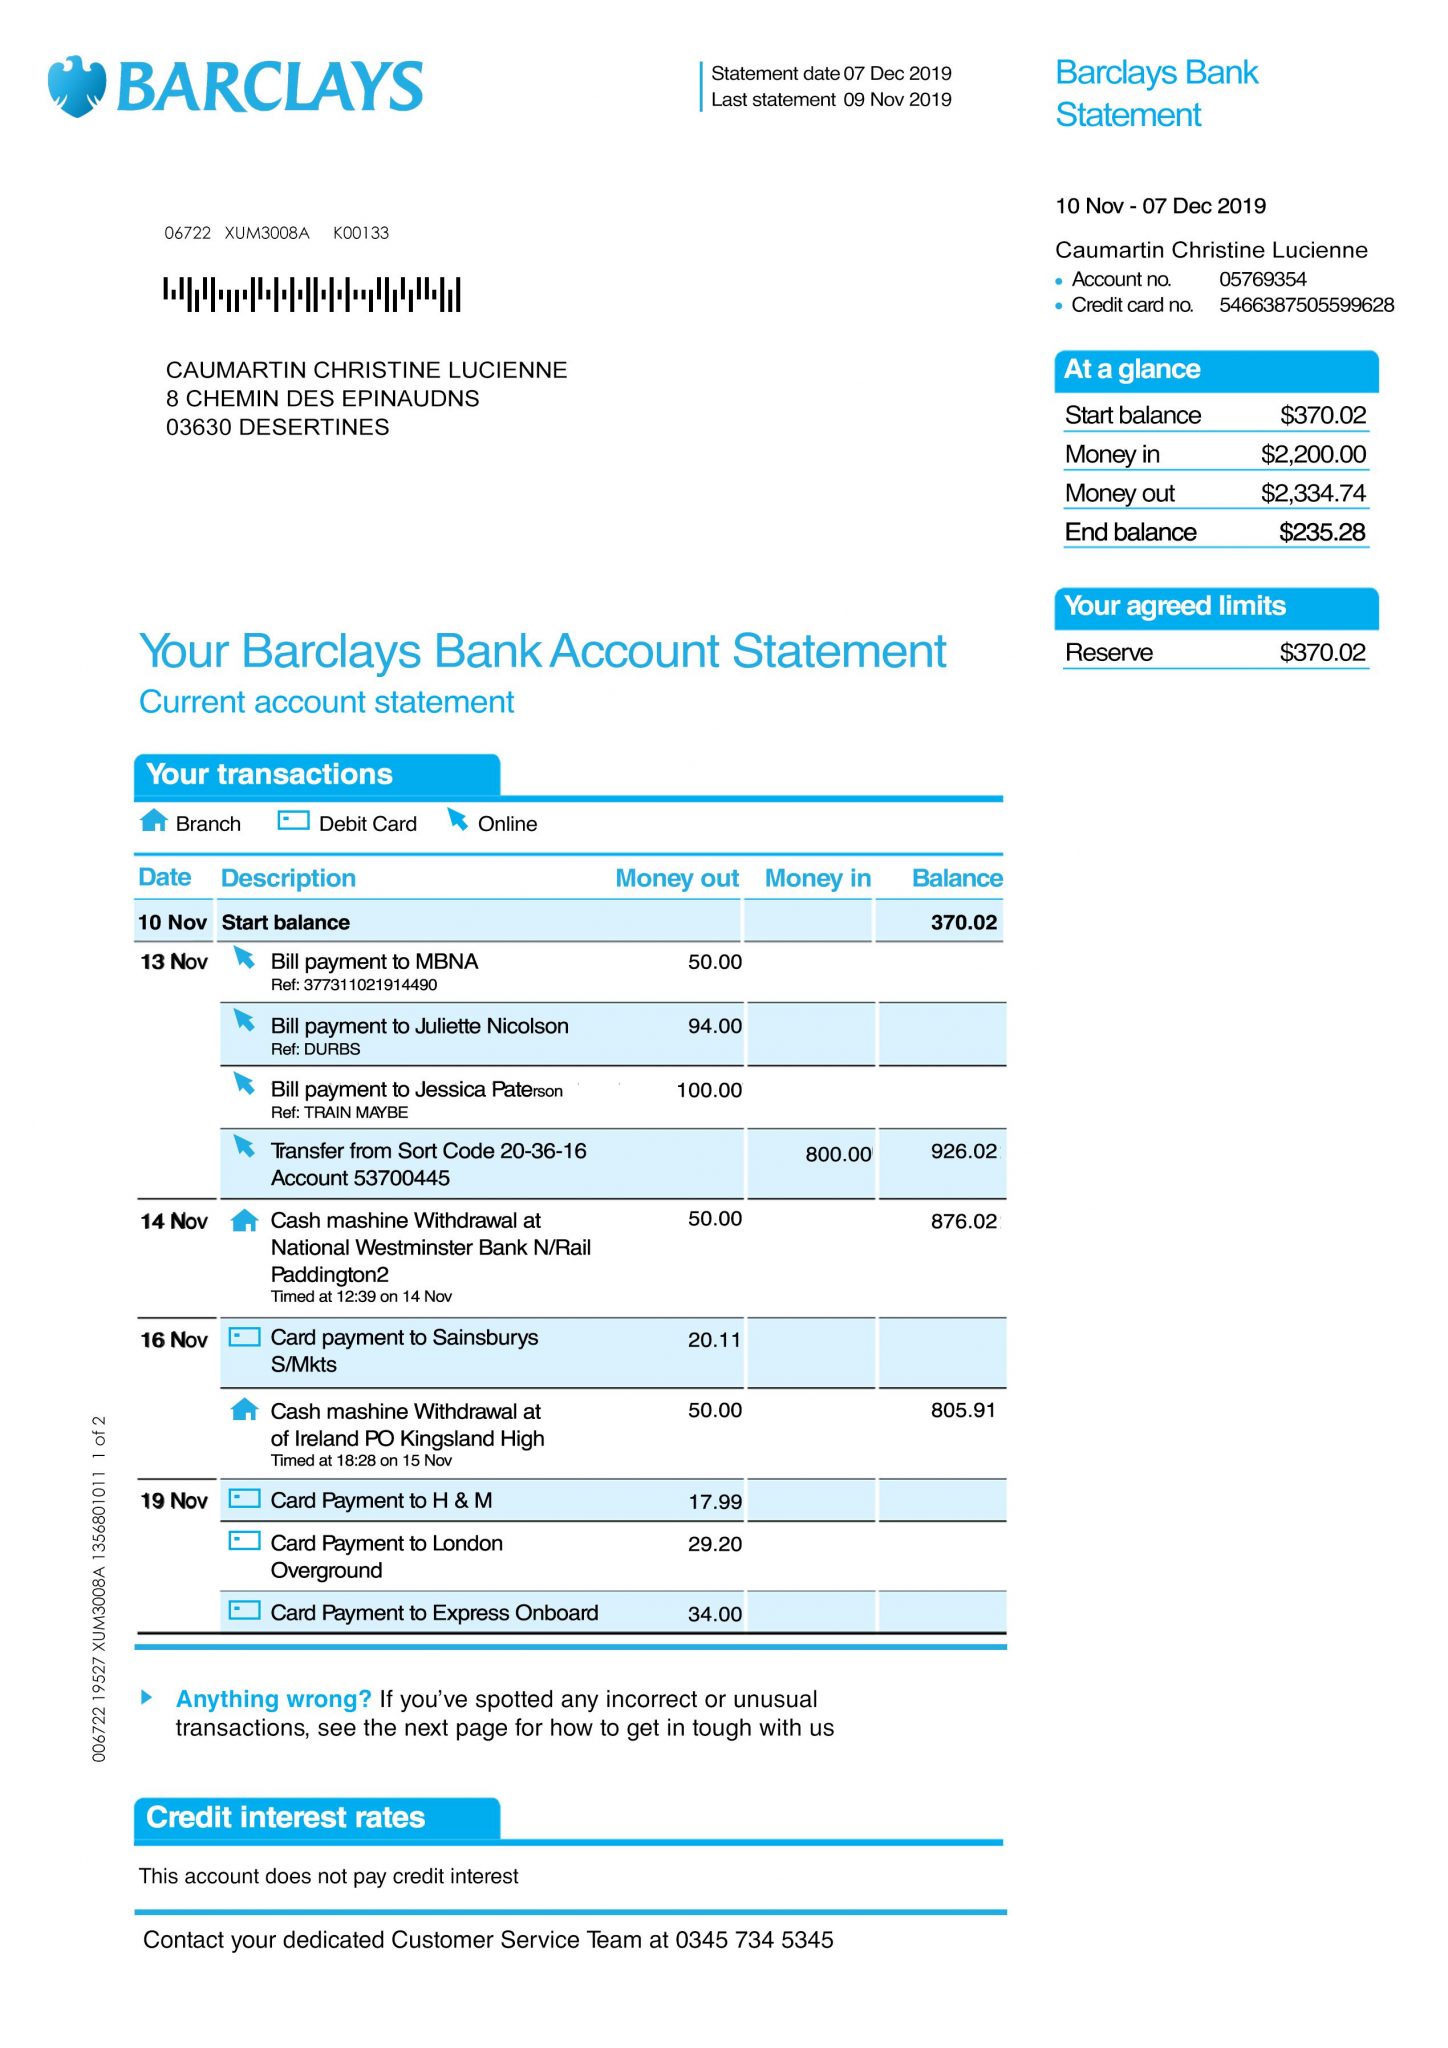 Barclays Bank Statement psd template  Amazing Tools For Credit Card Statement Template